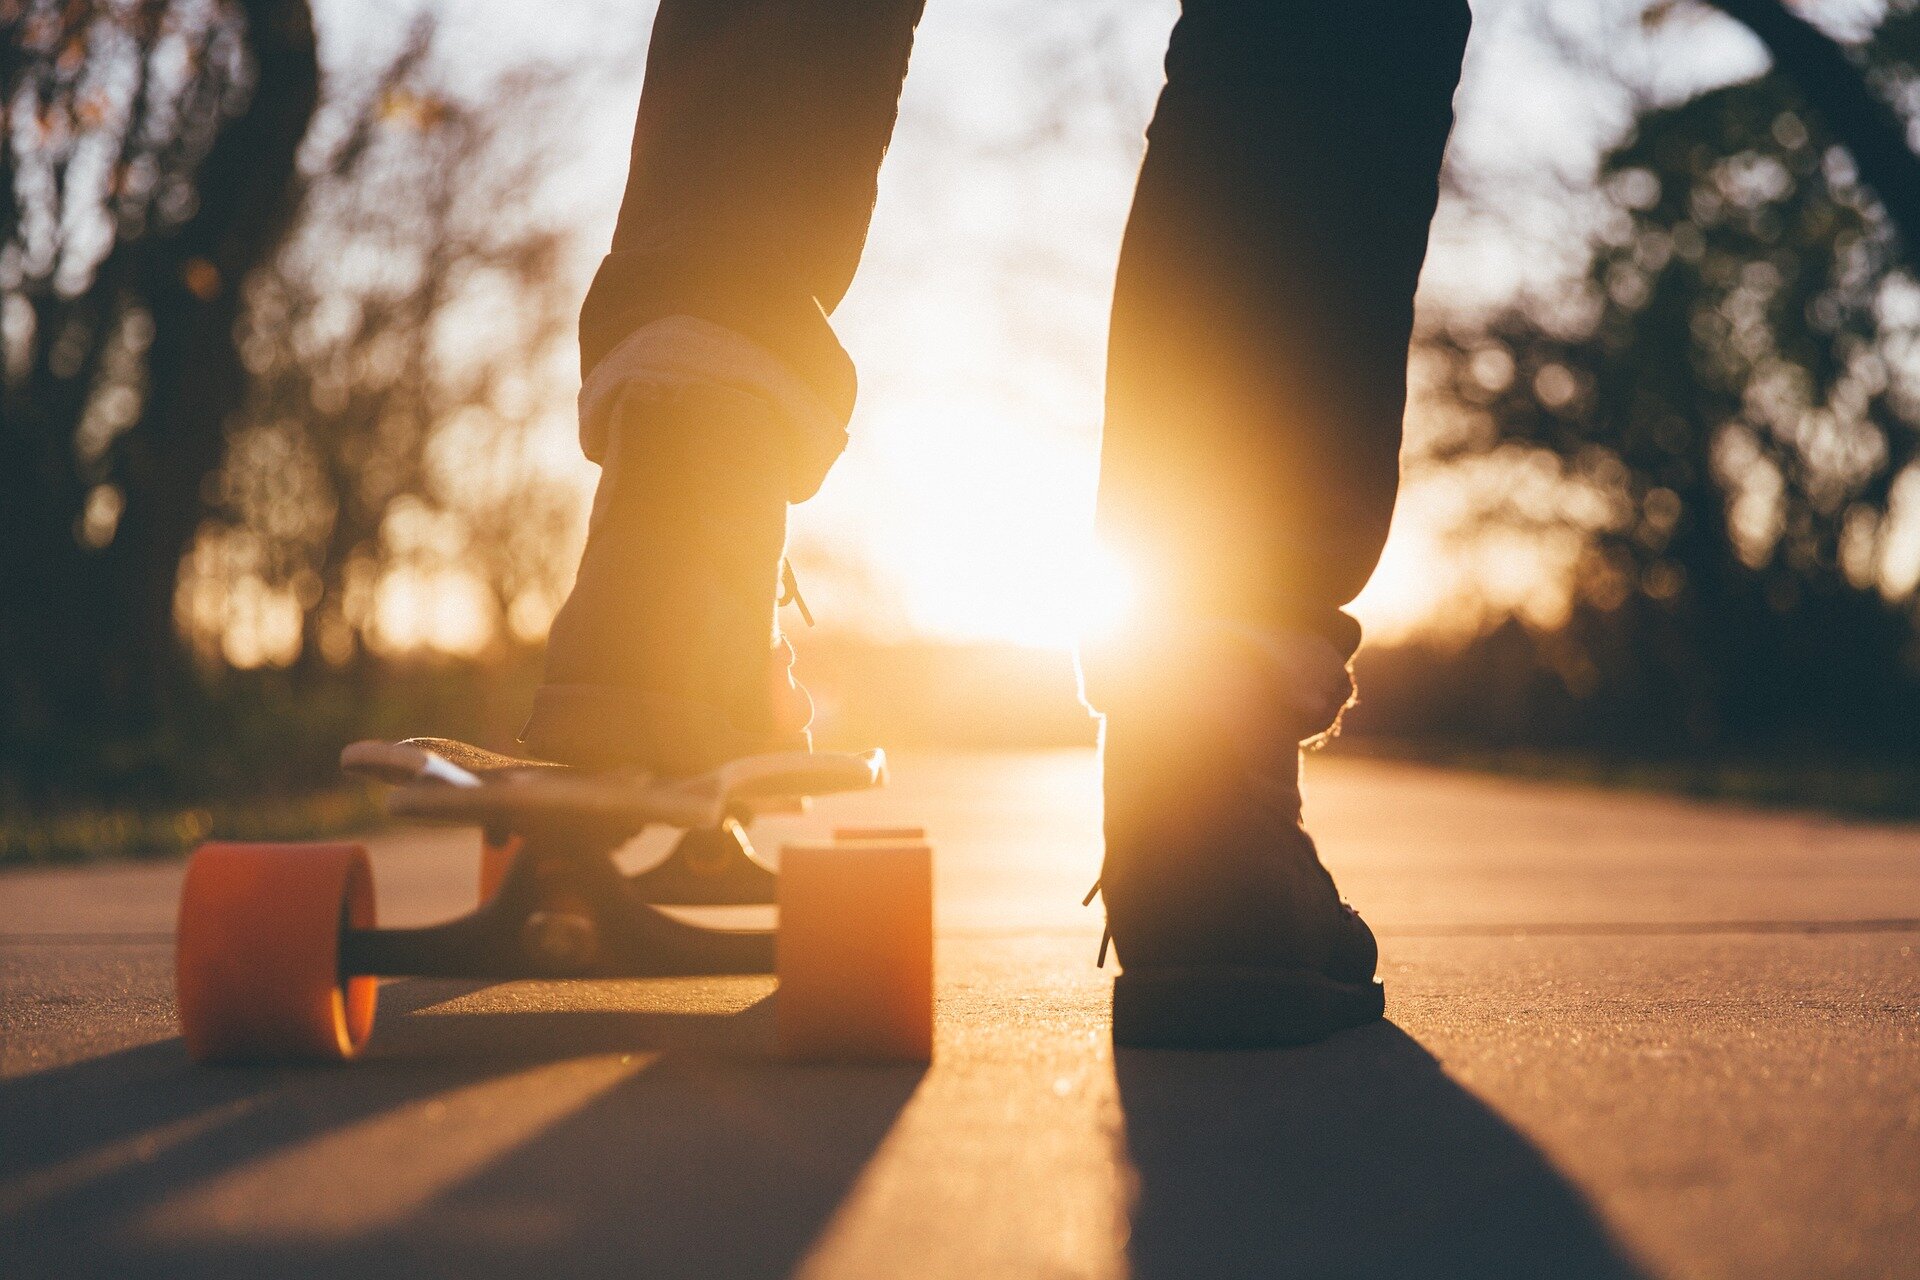 Experiencing the texture of skateboard sounds can help bridge divisions, new research says